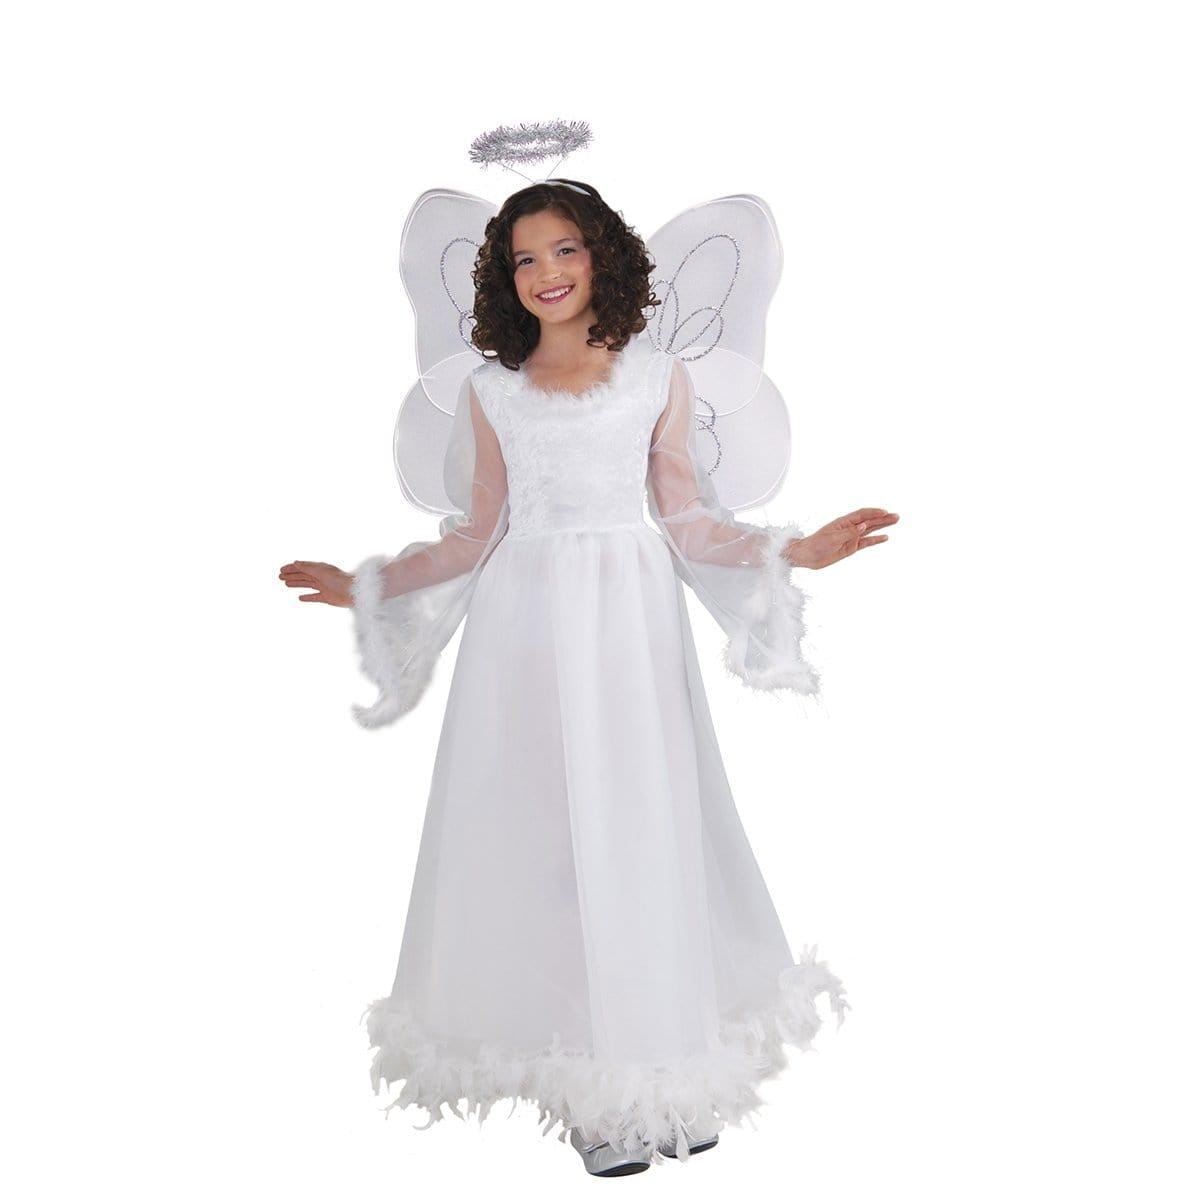 Buy Costume Accessories Angel accessory kit for kids sold at Party Expert